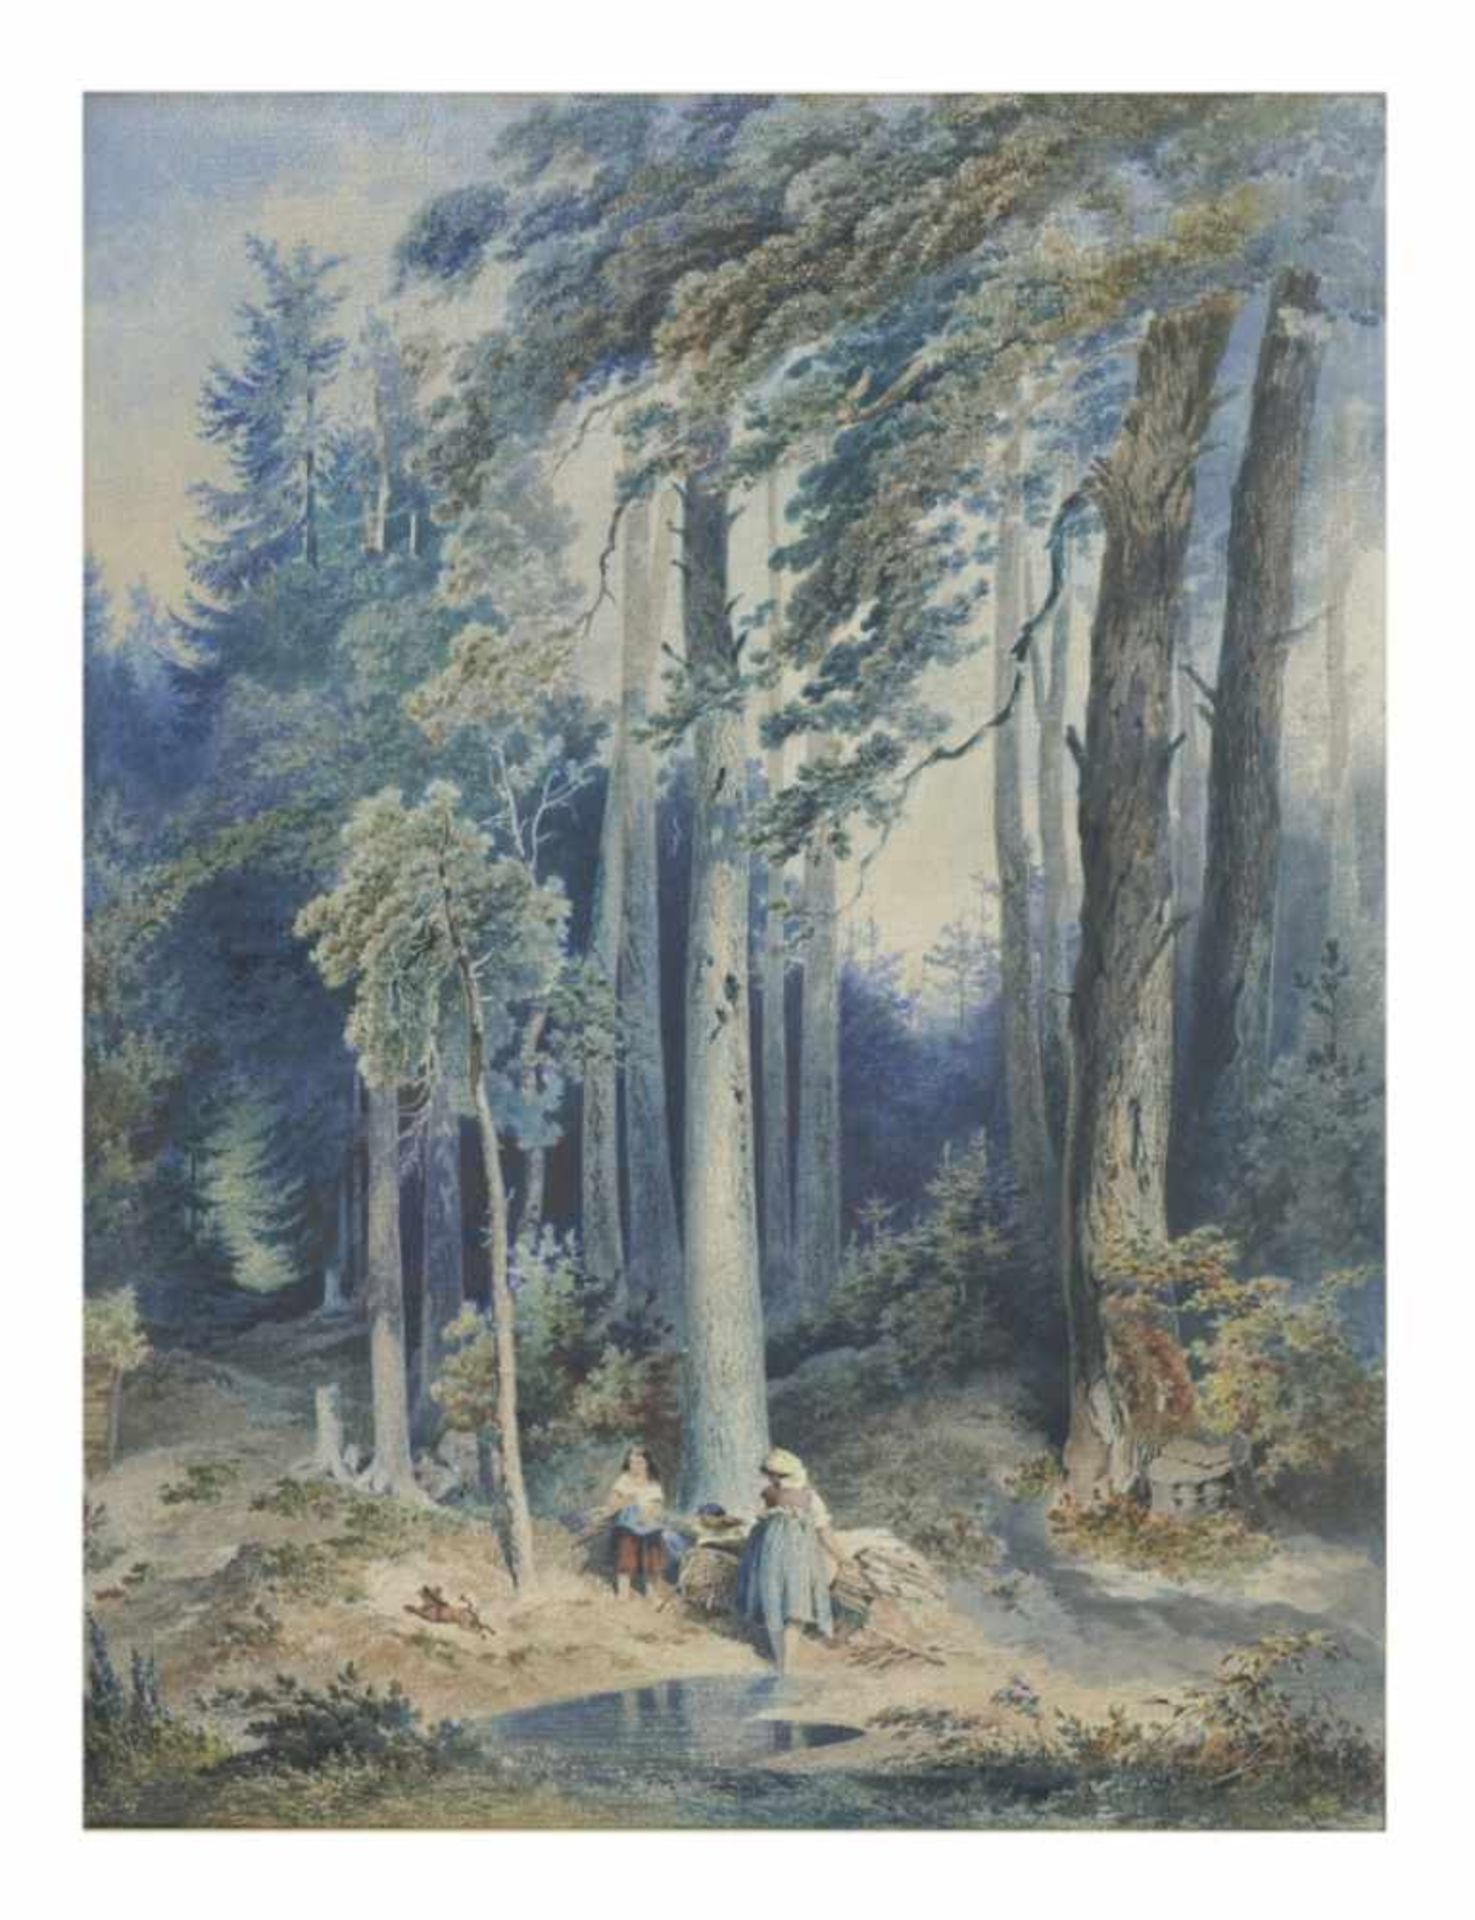 Unknown artist, In the forest, watercolor on paper, unsigned,53 x 41 cm, Provenance: